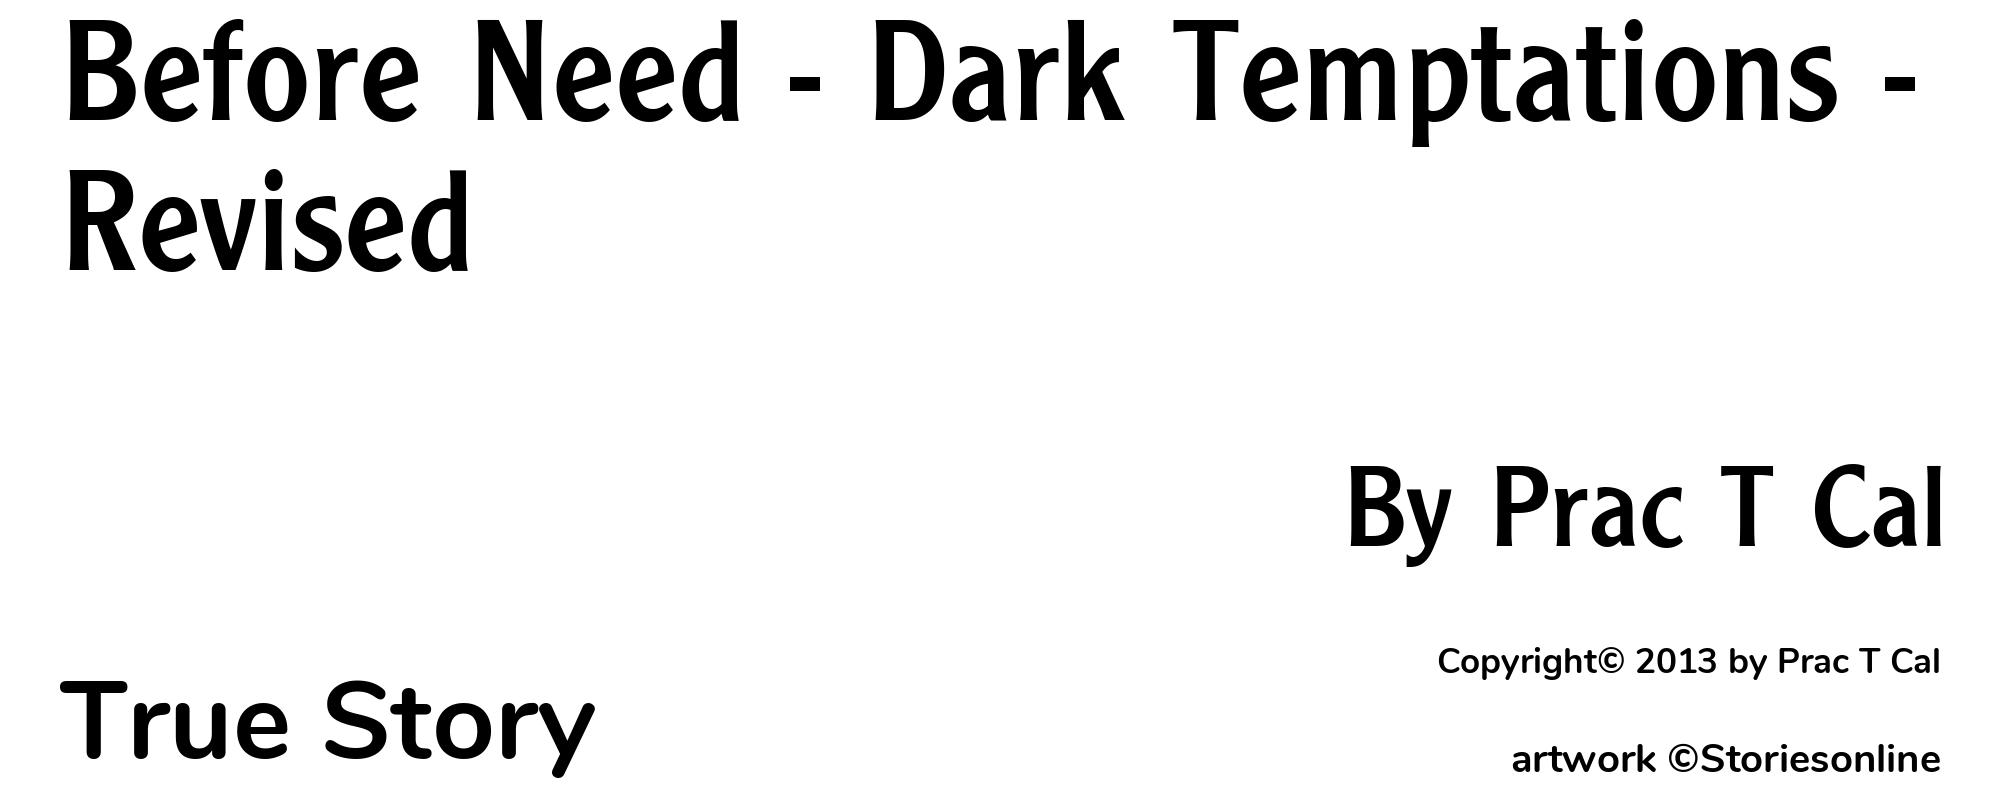 Before Need - Dark Temptations - Revised - Cover